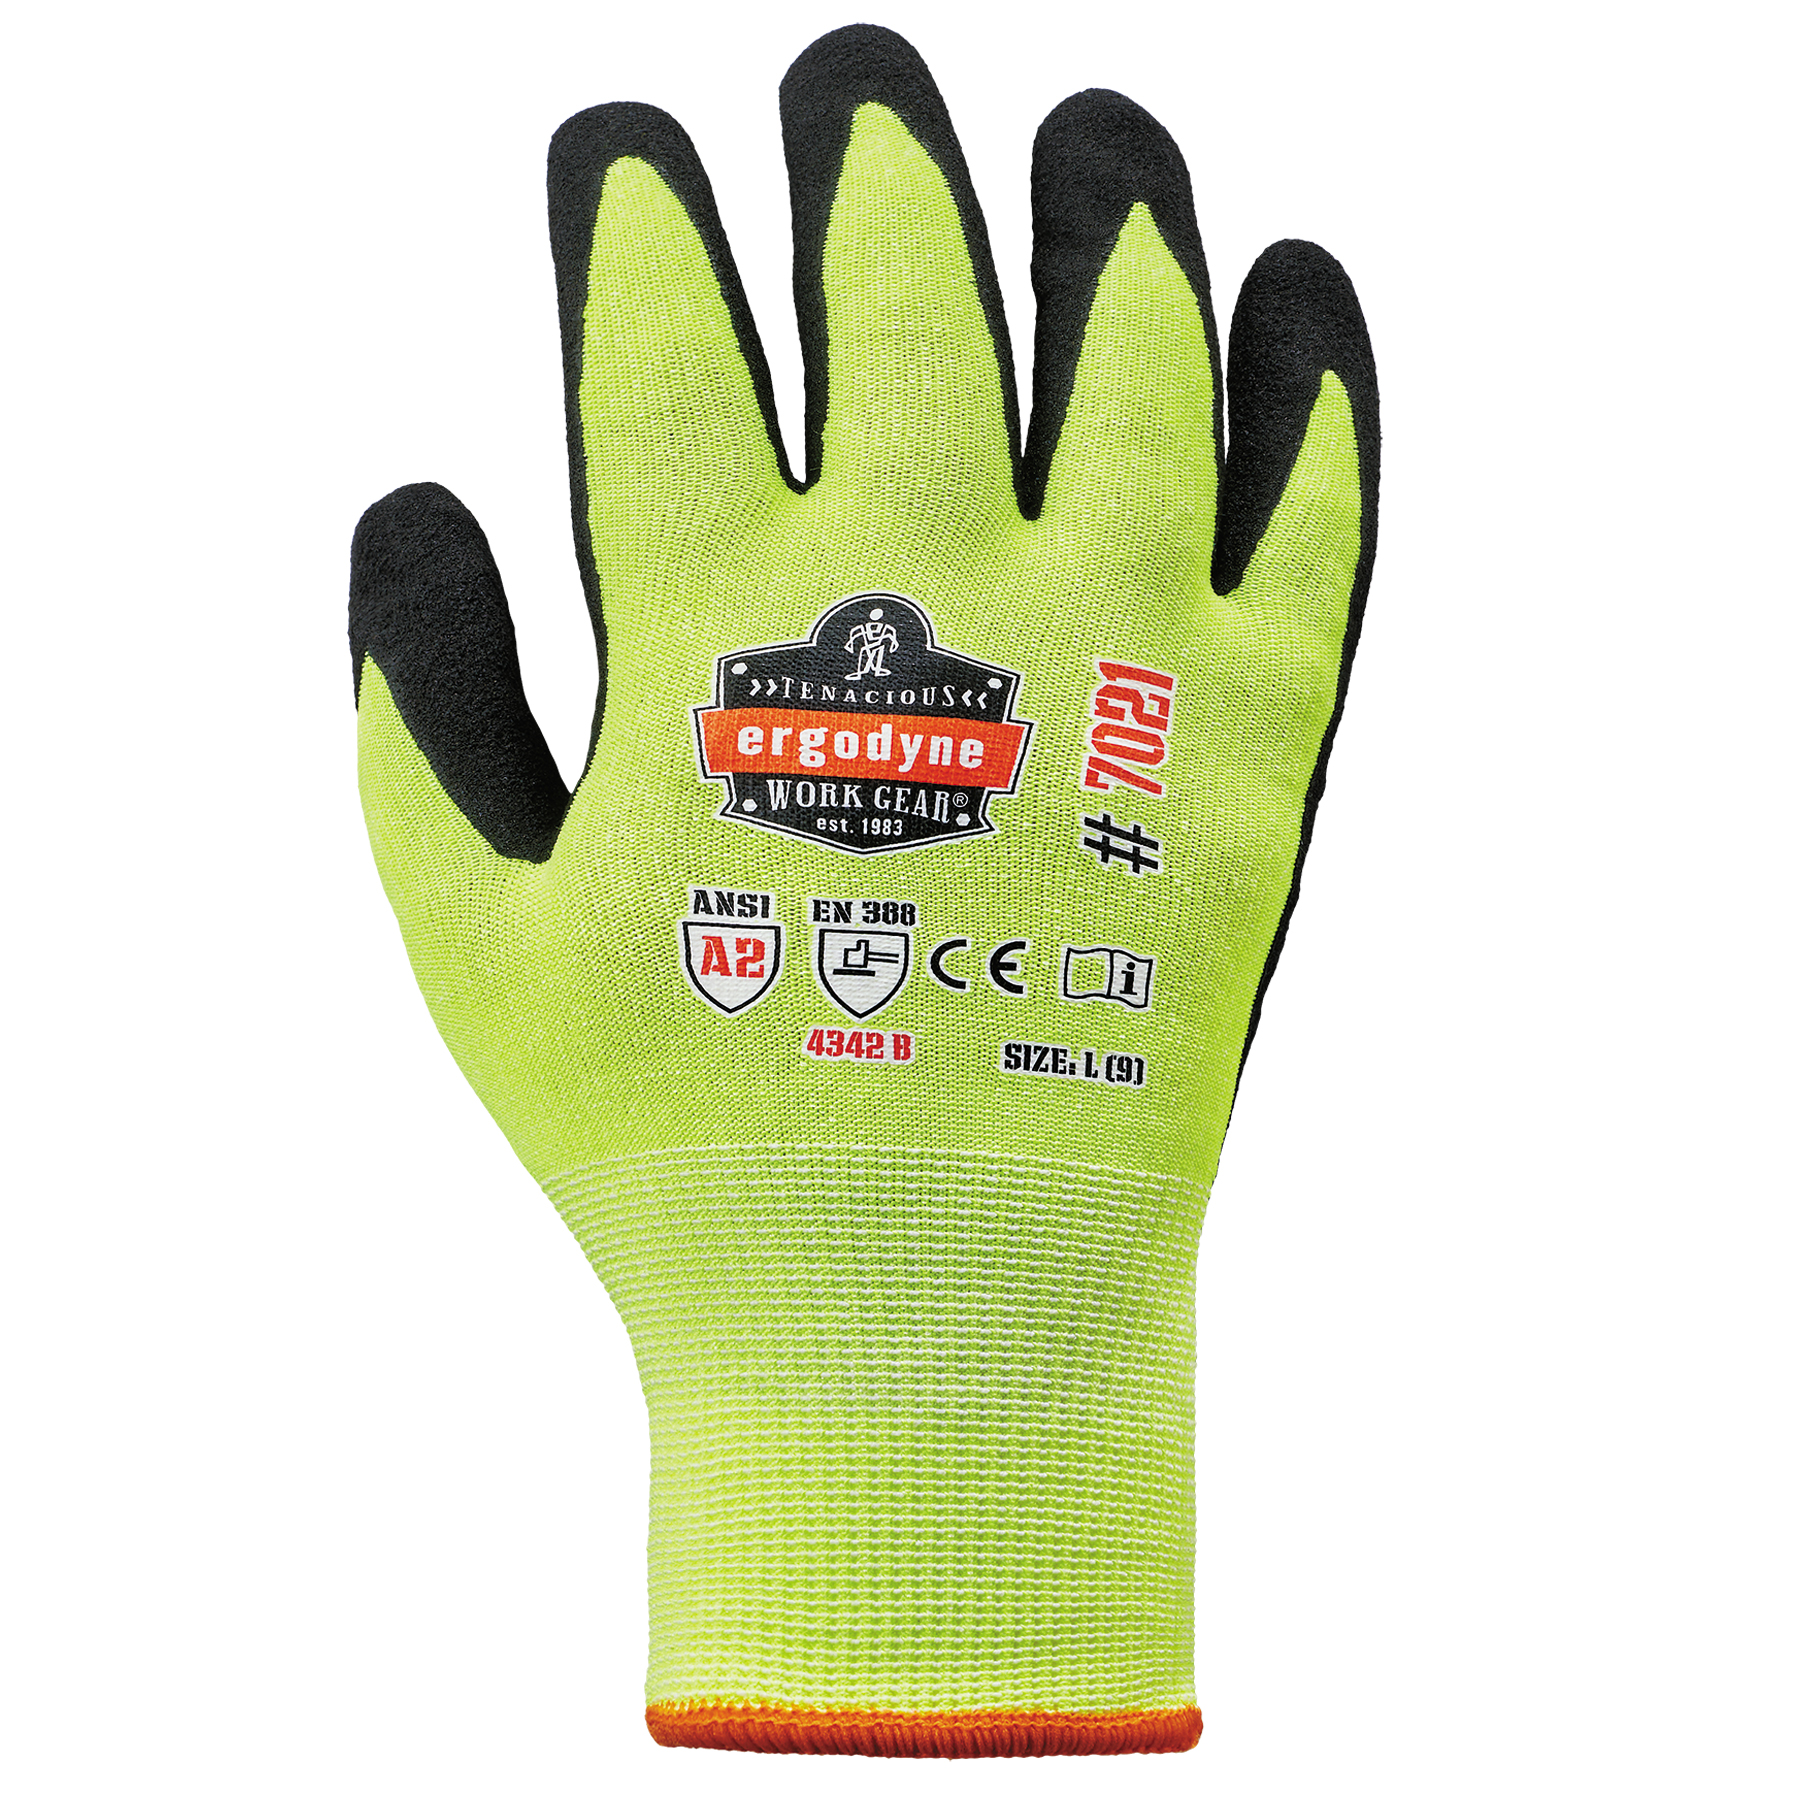 CUT & HEAT Protection PPE Hi Vis Gloves Ultimate Safety Gloves COLD THERMAL 